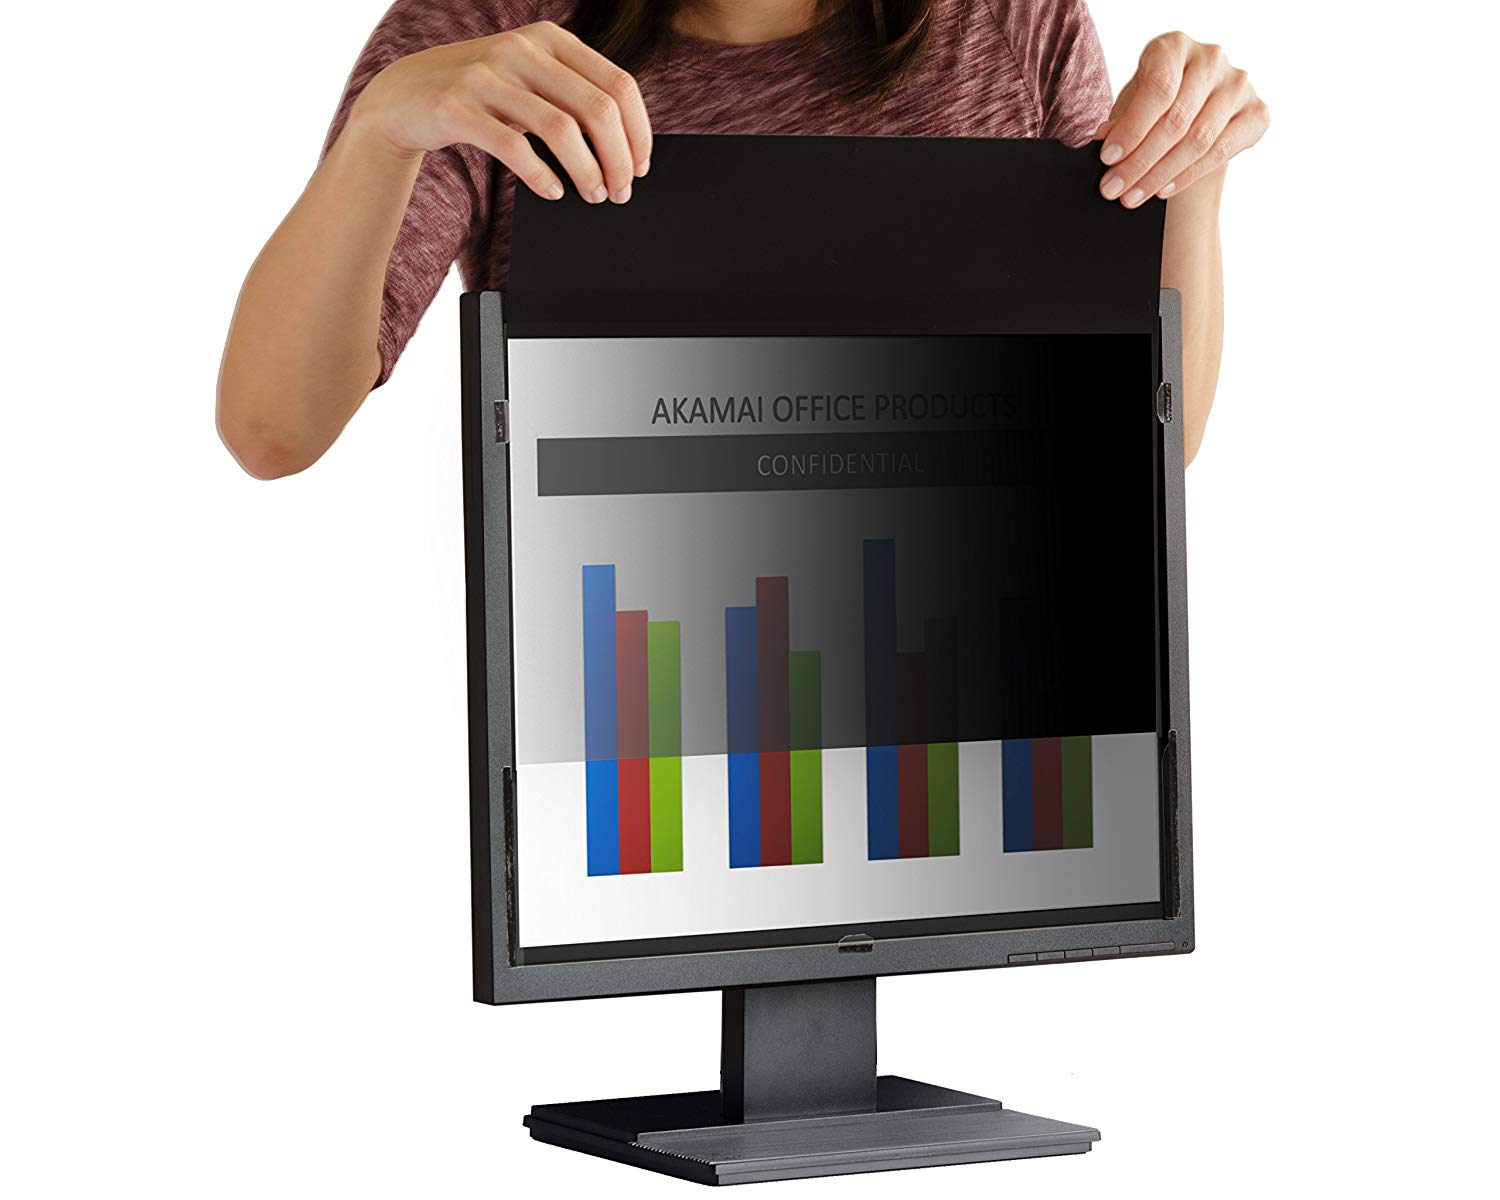 Akamai Office Products 17.0 Inch (Diagonally Measured) SQUARE Privacy Screen Filter for Computer Monitors-Anti Glare (AP17.0)-Please Measure Carefully